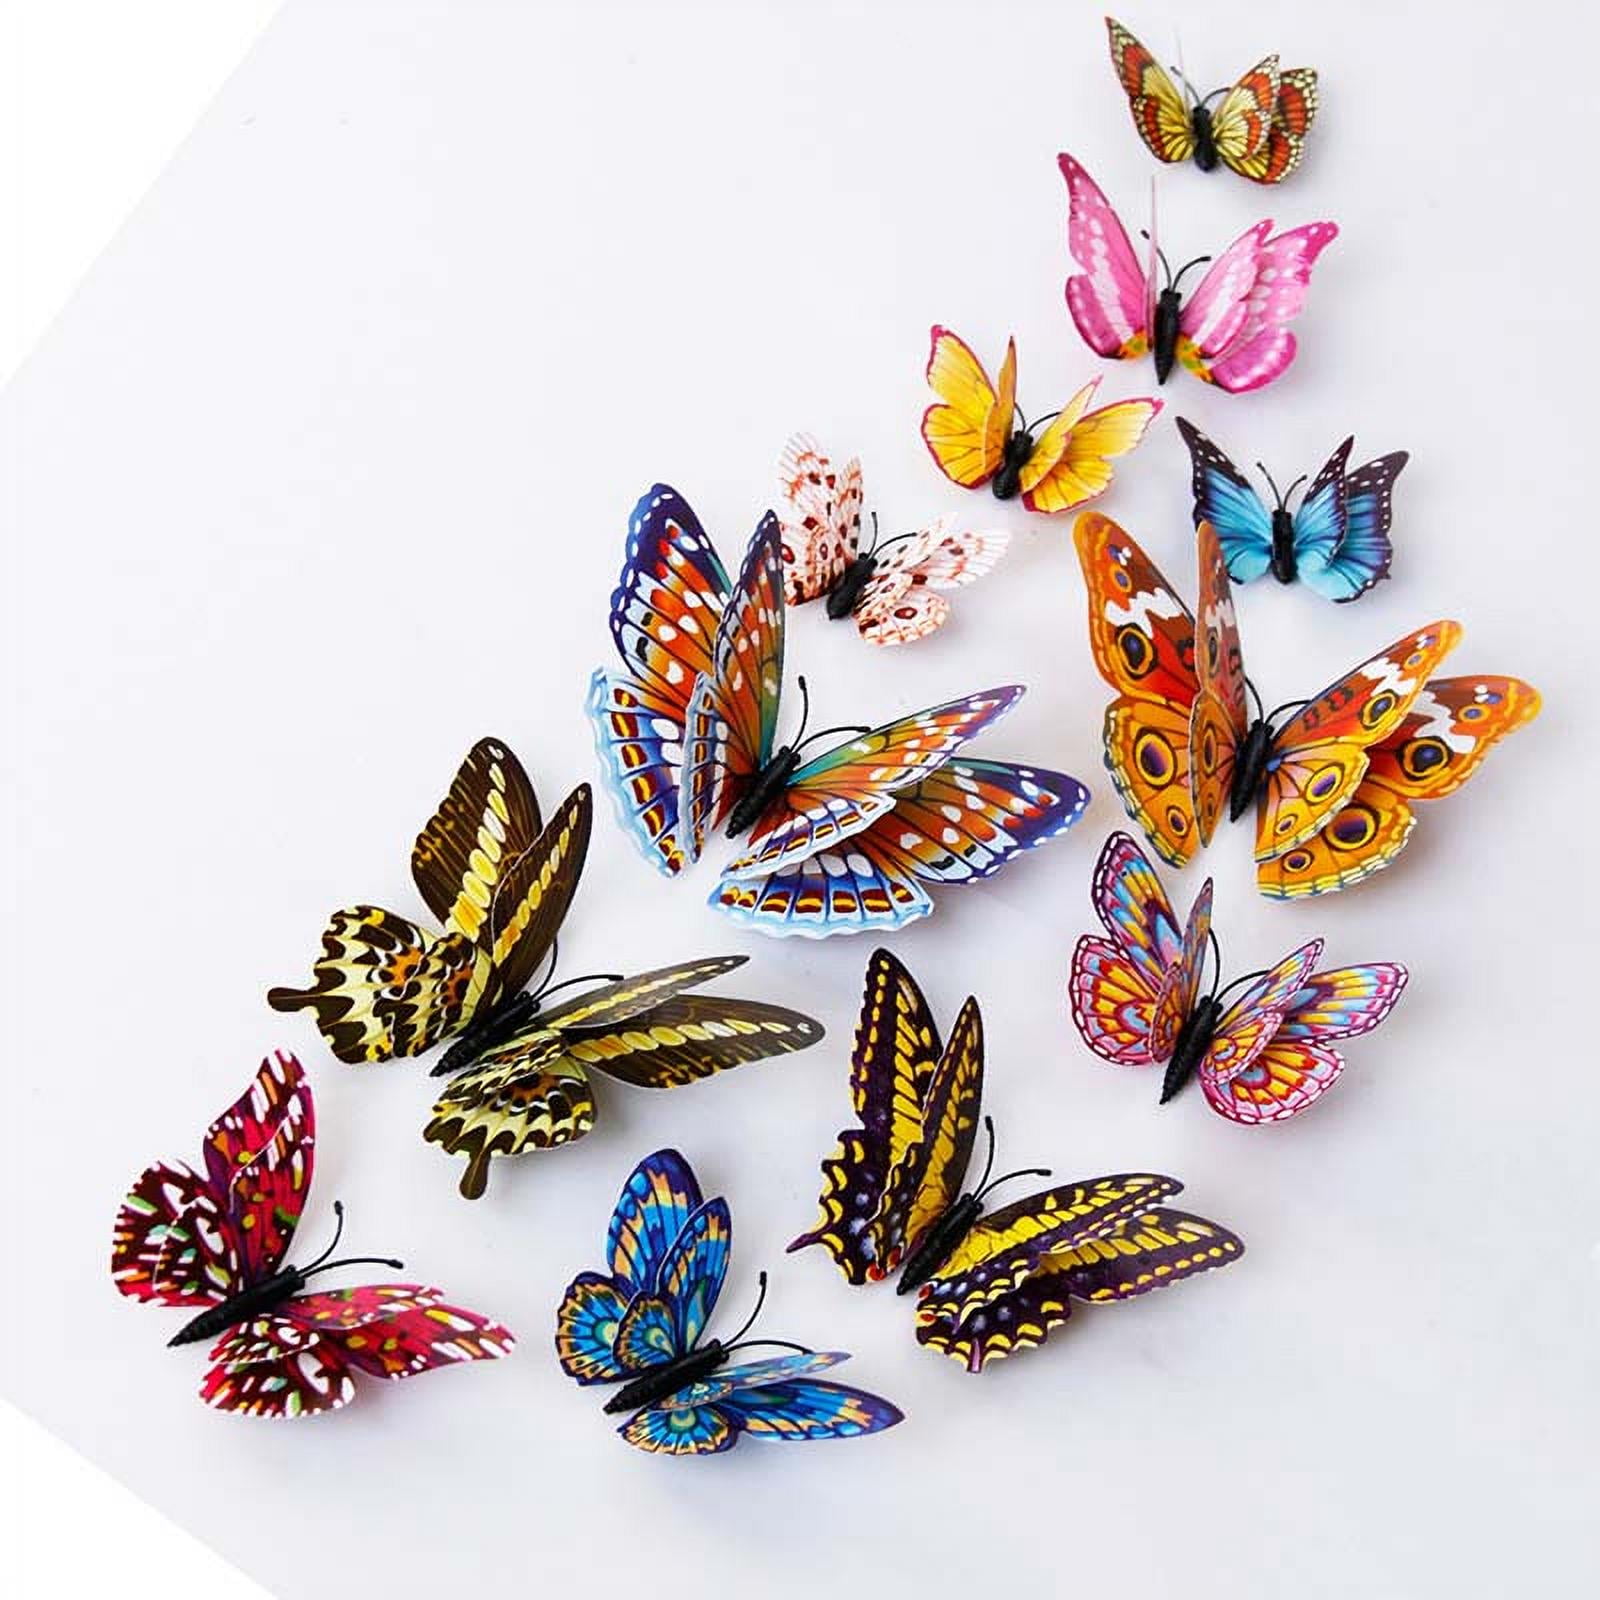 Sticker 12Pcs/lot Magnet Wall Stickers Decor Home Decoration 3D Butterfly 